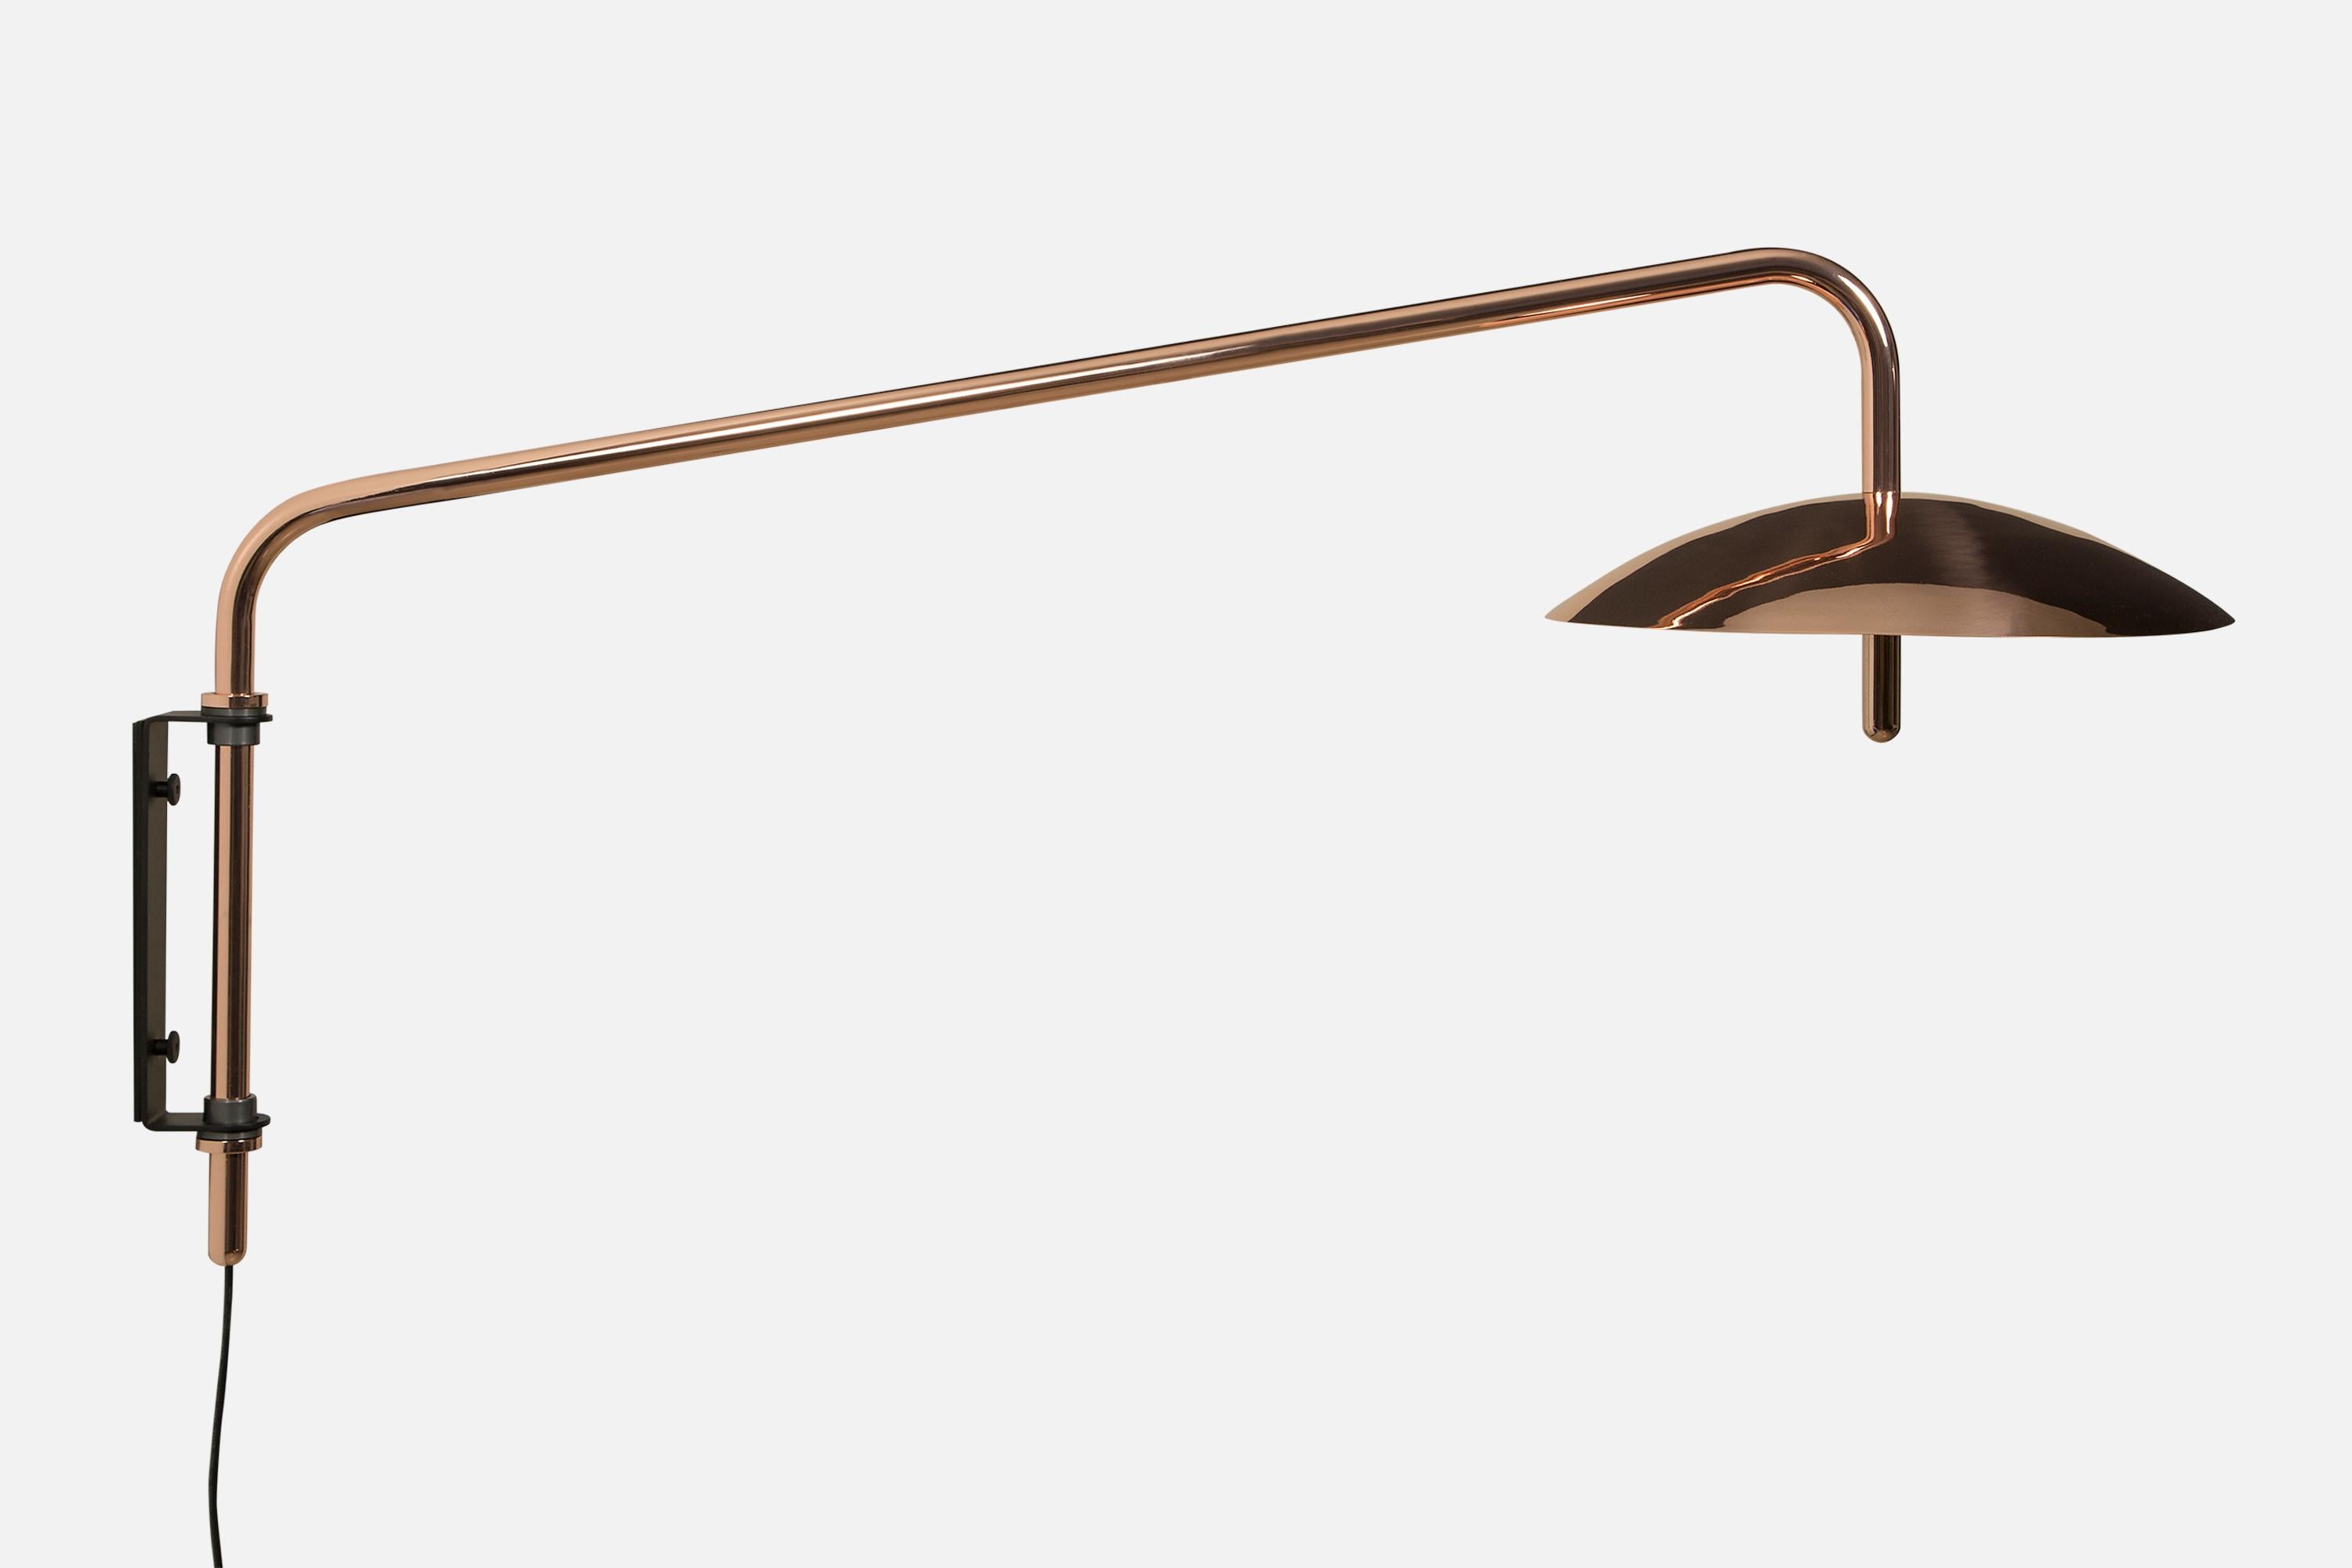 Metal Signal Arm Sconce in White x Copper, Long, Hardwire, by Souda, Made to Order For Sale